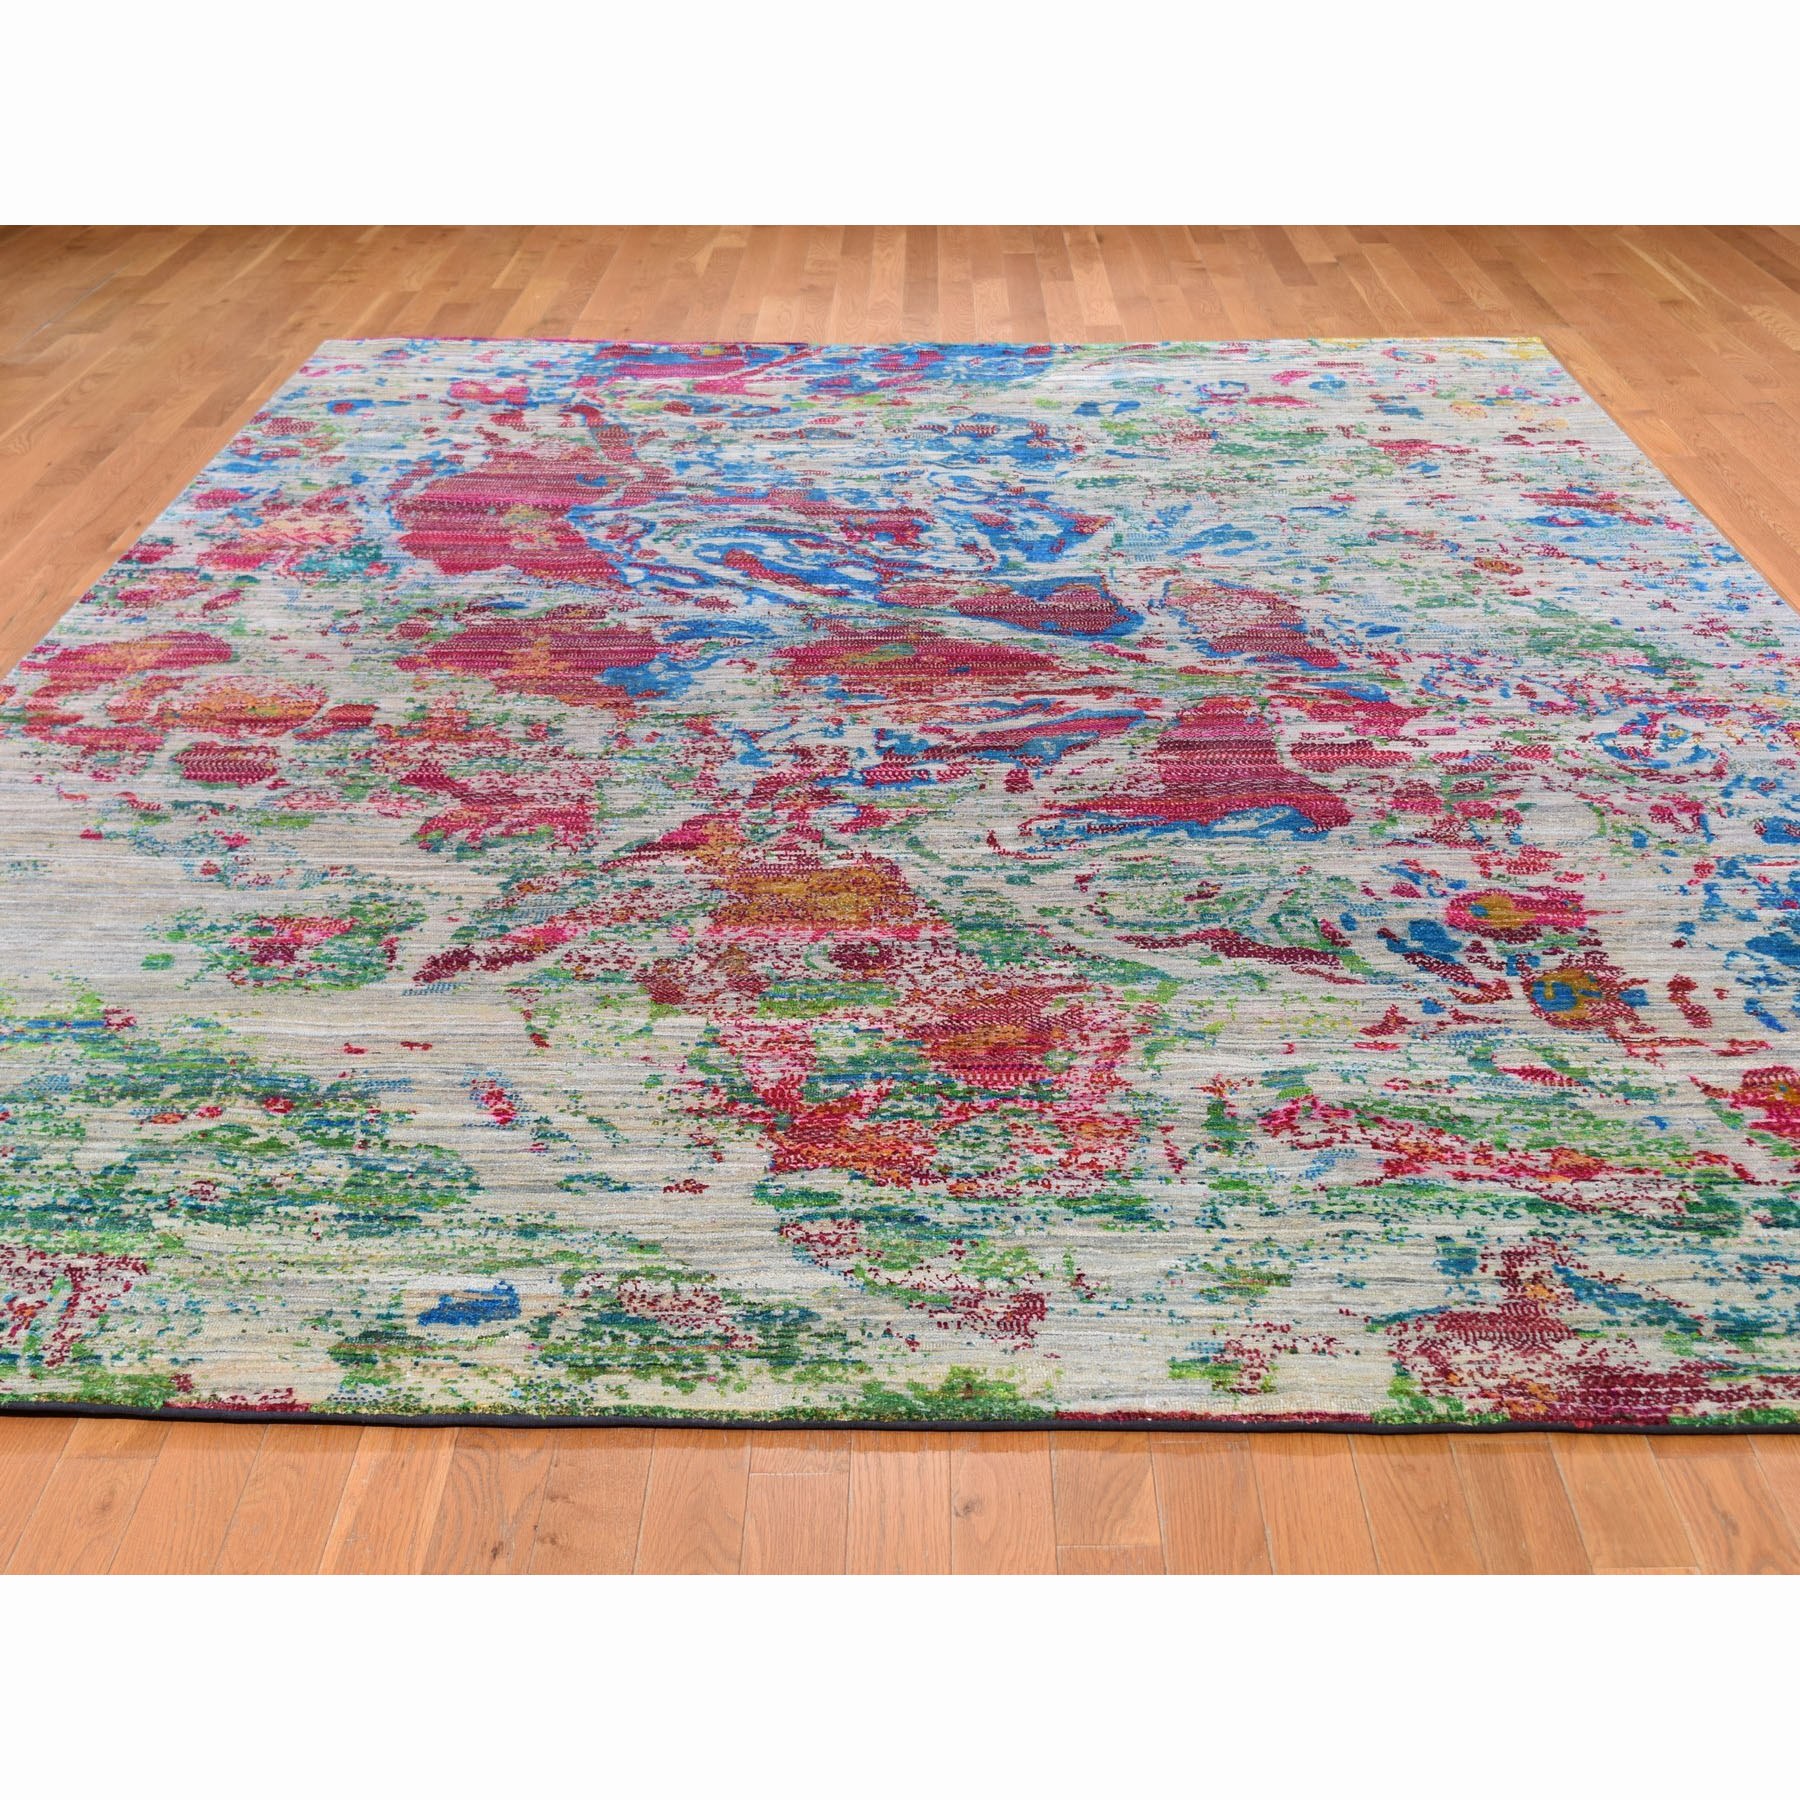 8-10 x12-2  Colorful Abstract Design Sari Silk With Textured Wool Hand Knotted Oriental Rug 